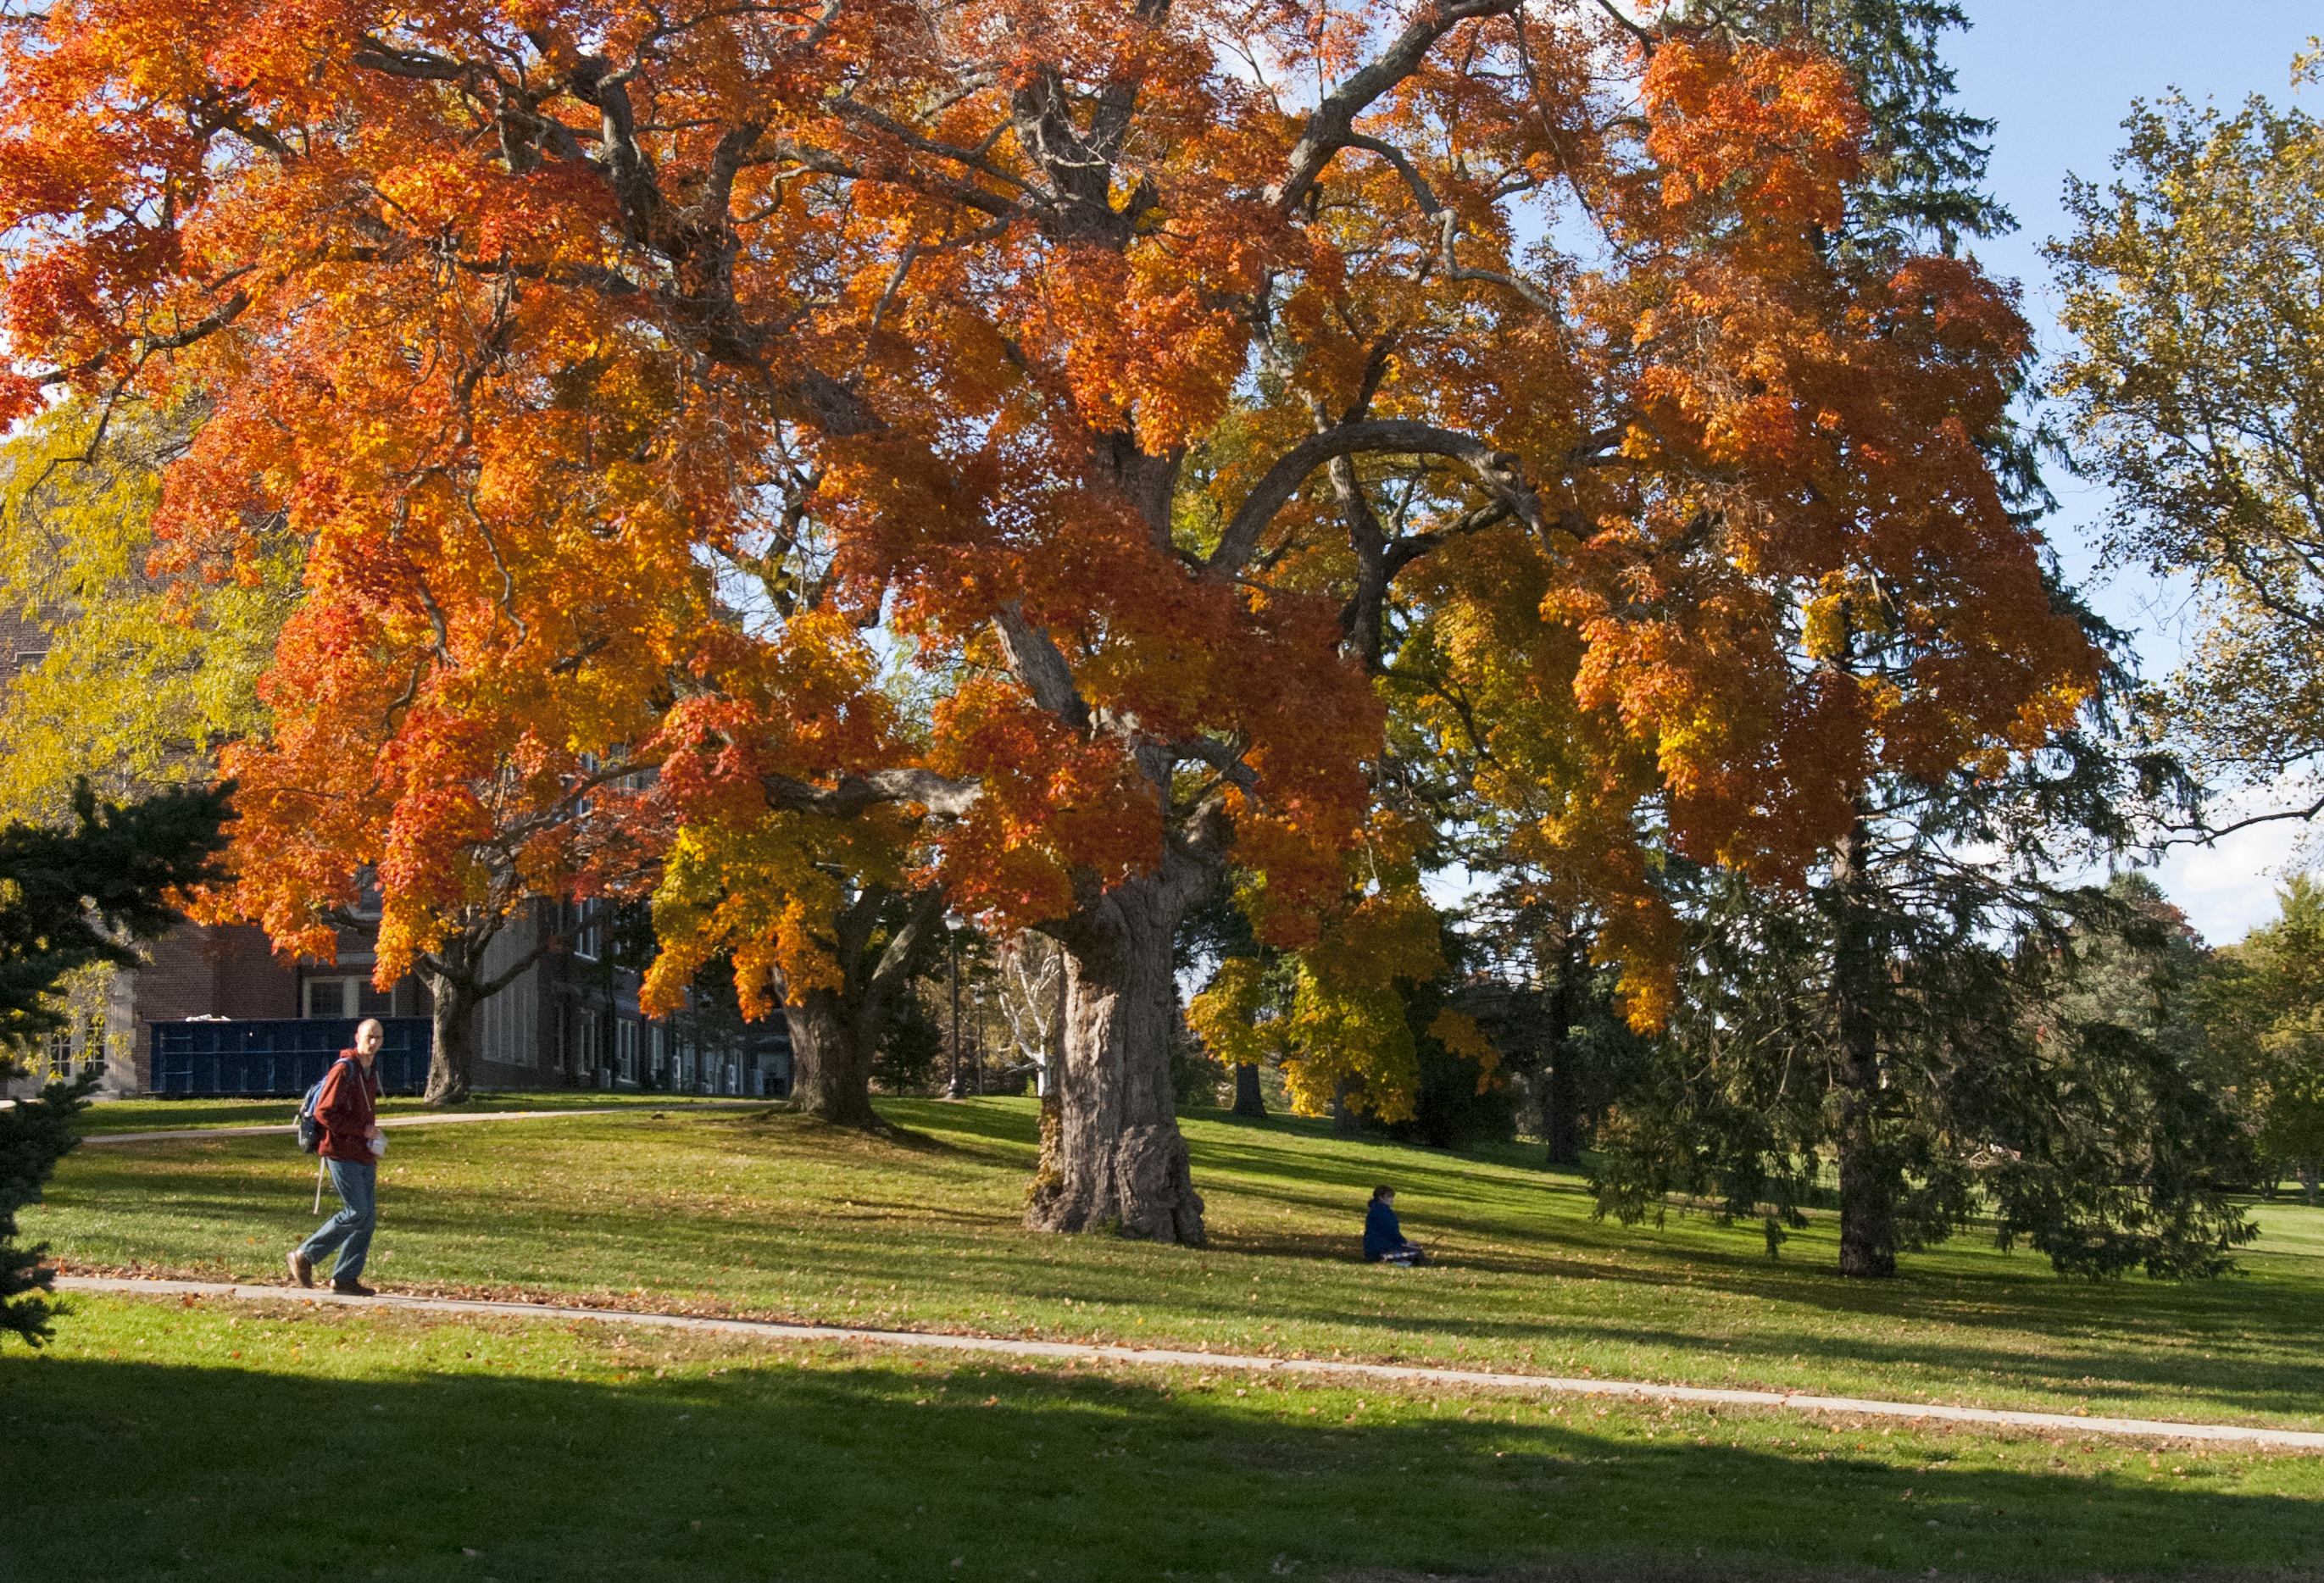 Climate Change Could Affect Fall Foliage Timing - UConn Today